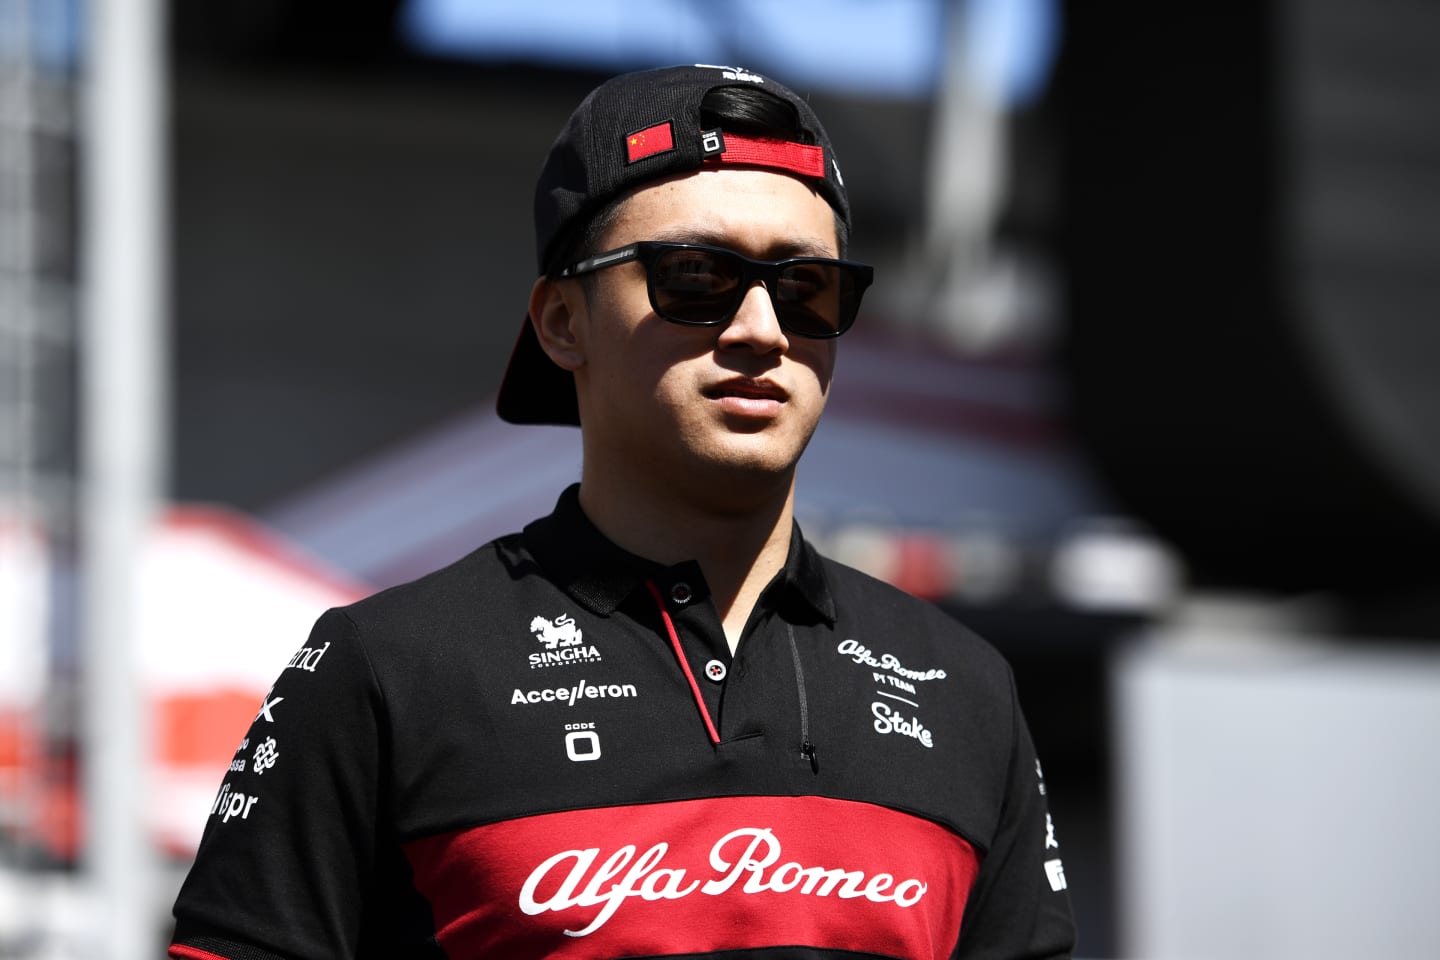 BAKU, AZERBAIJAN - APRIL 27: Zhou Guanyu of China and Alfa Romeo F1 looks on in the Paddock during previews ahead of the F1 Grand Prix of Azerbaijan at Baku City Circuit on April 27, 2023 in Baku, Azerbaijan. (Photo by Rudy Carezzevoli/Getty Images)